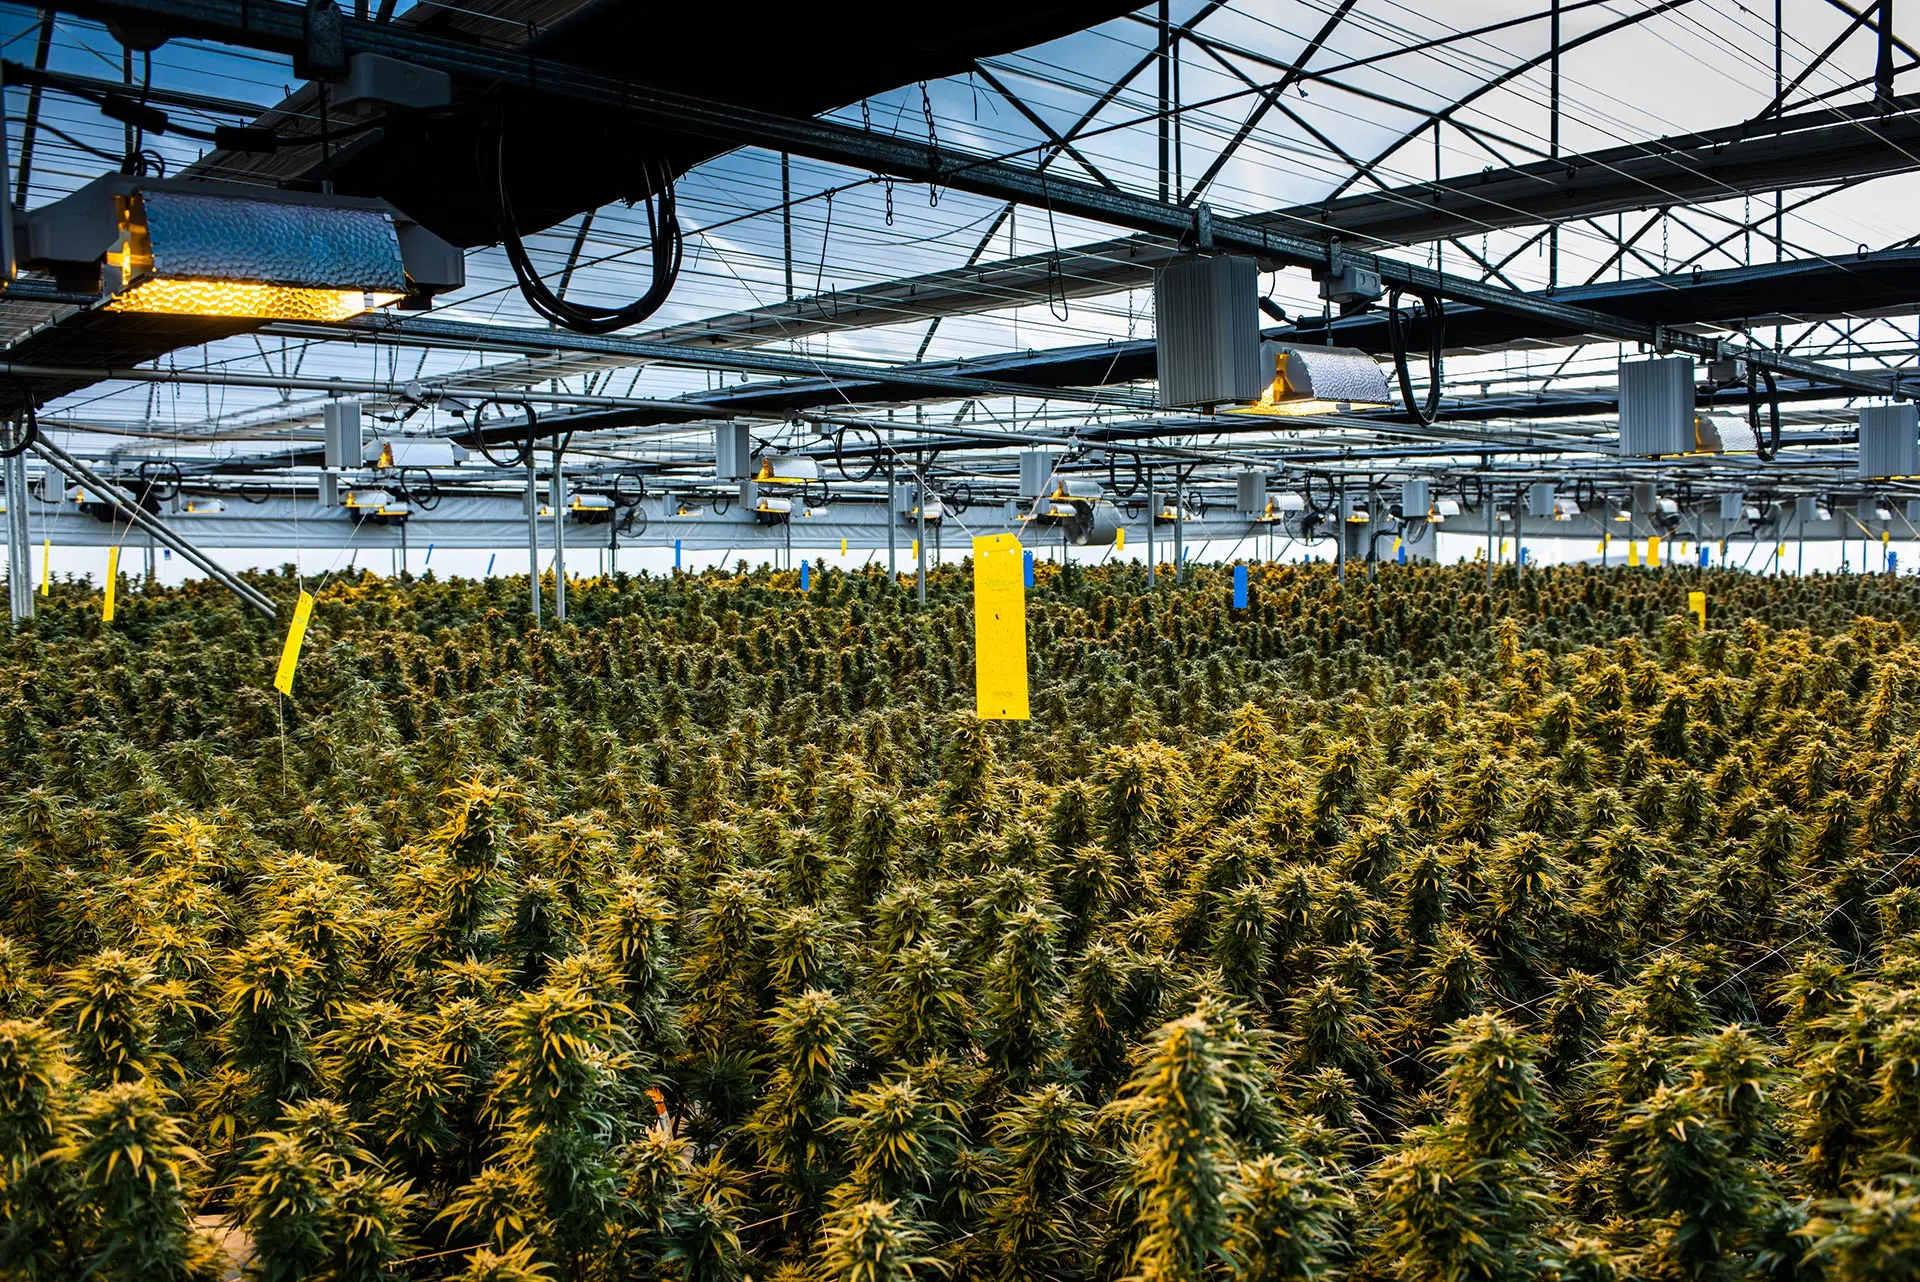 Cannabis cultivation has an enormous carbon footprint, study finds